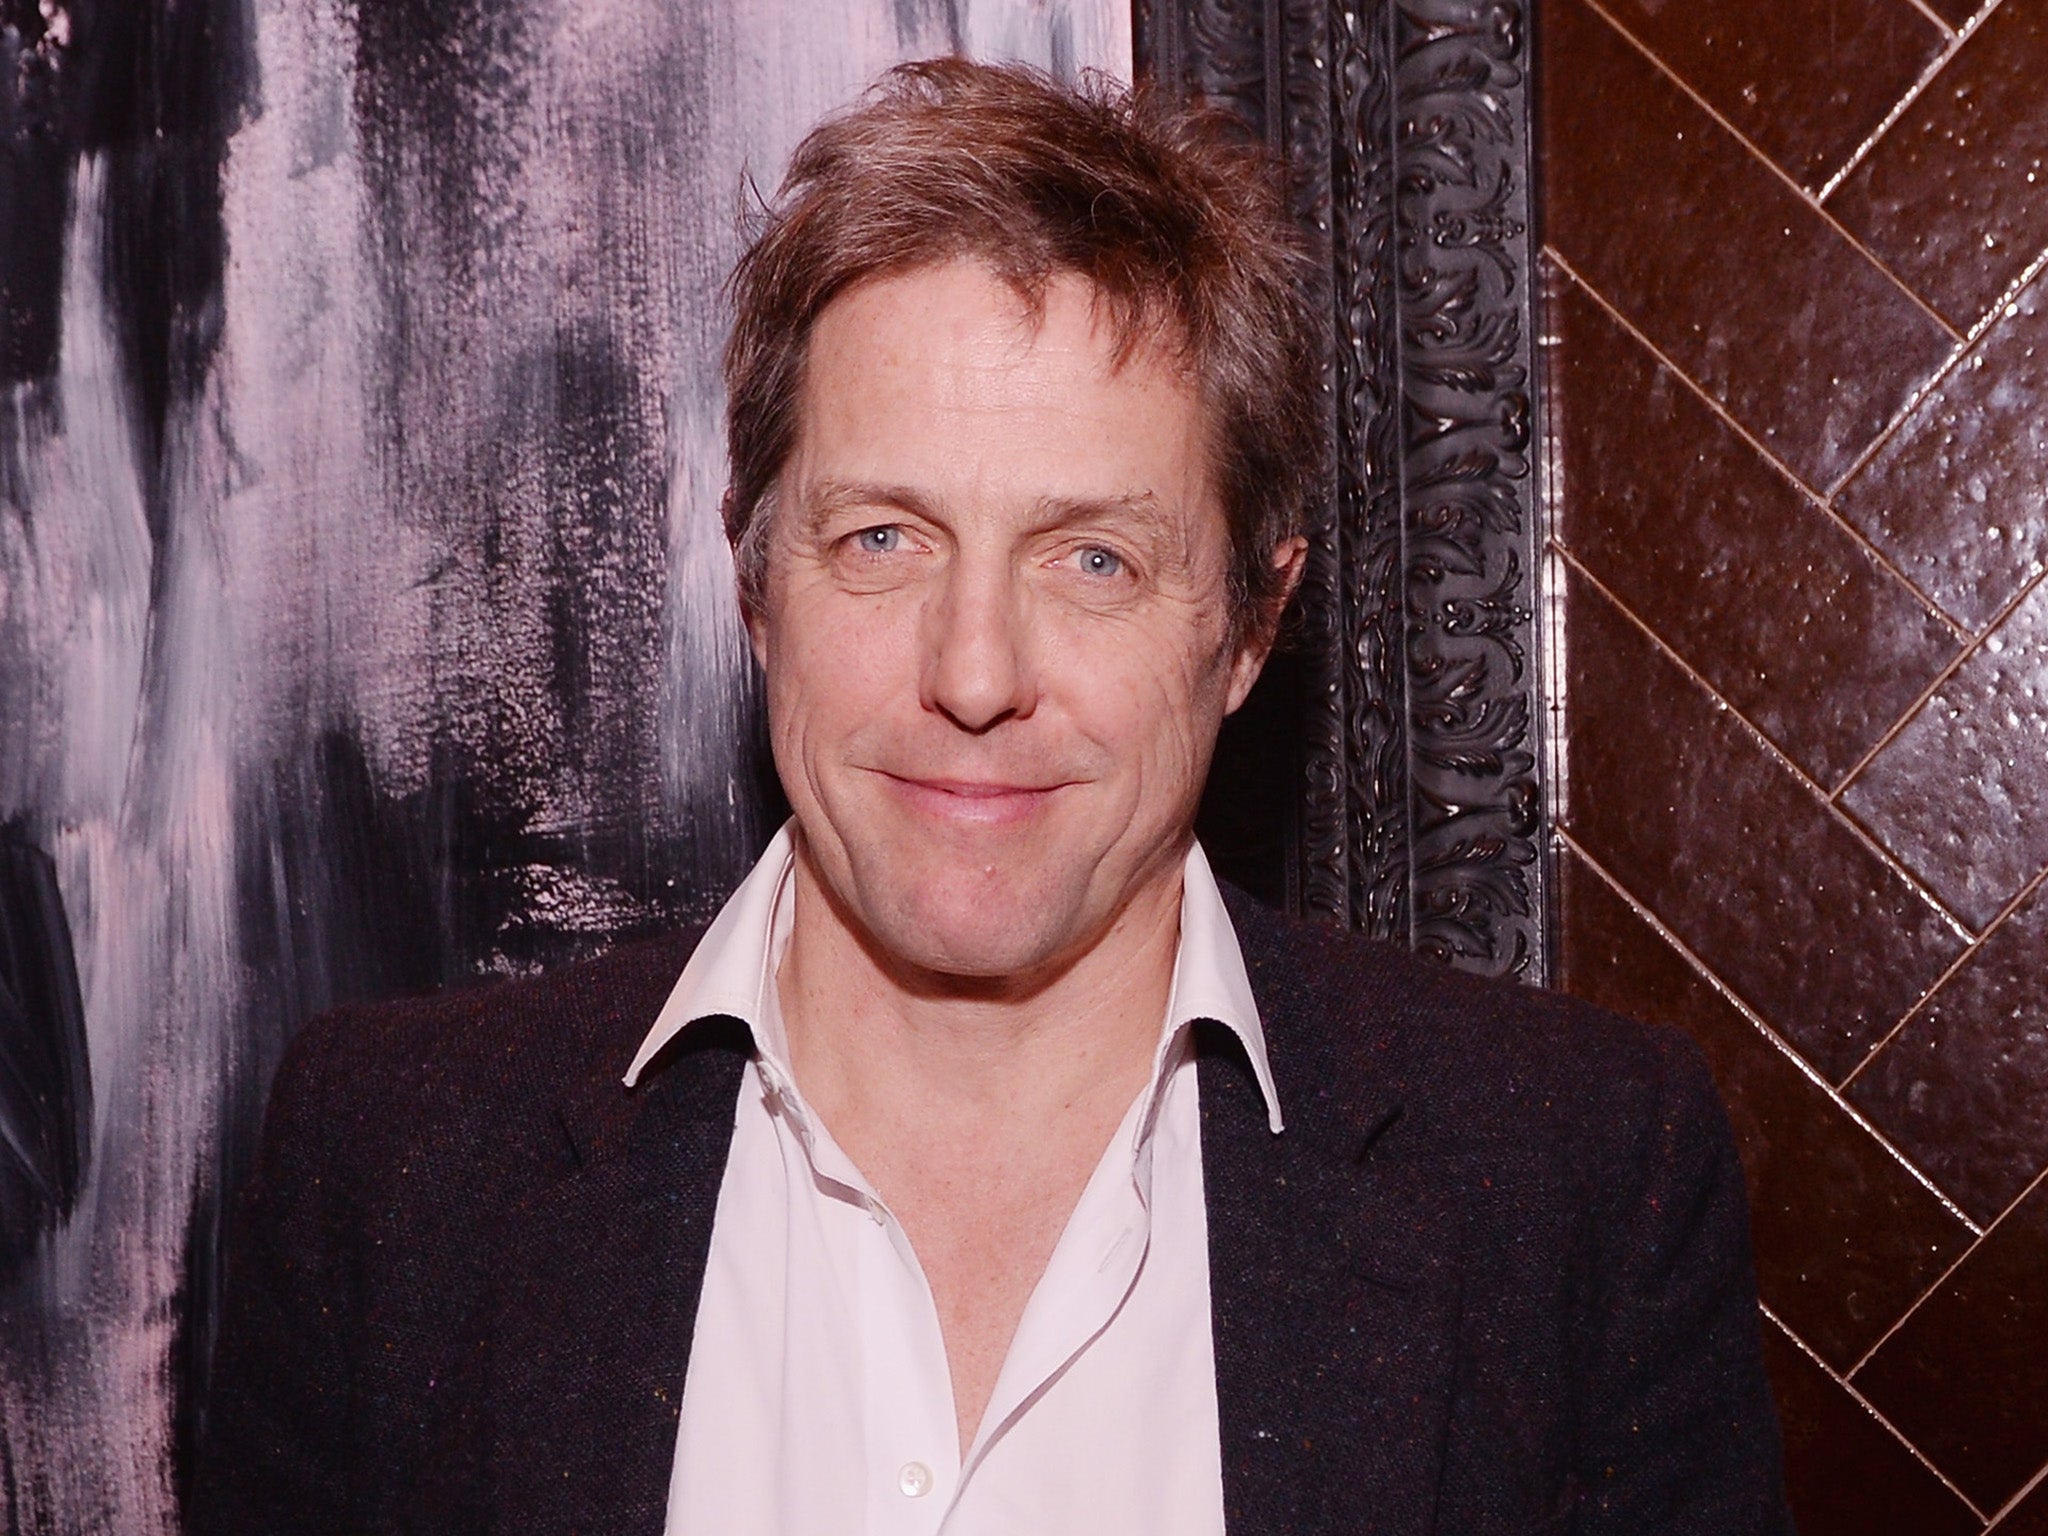 Hugh Grant attends the after-party for a special screening of ‘The Rewrite’ in New York last year